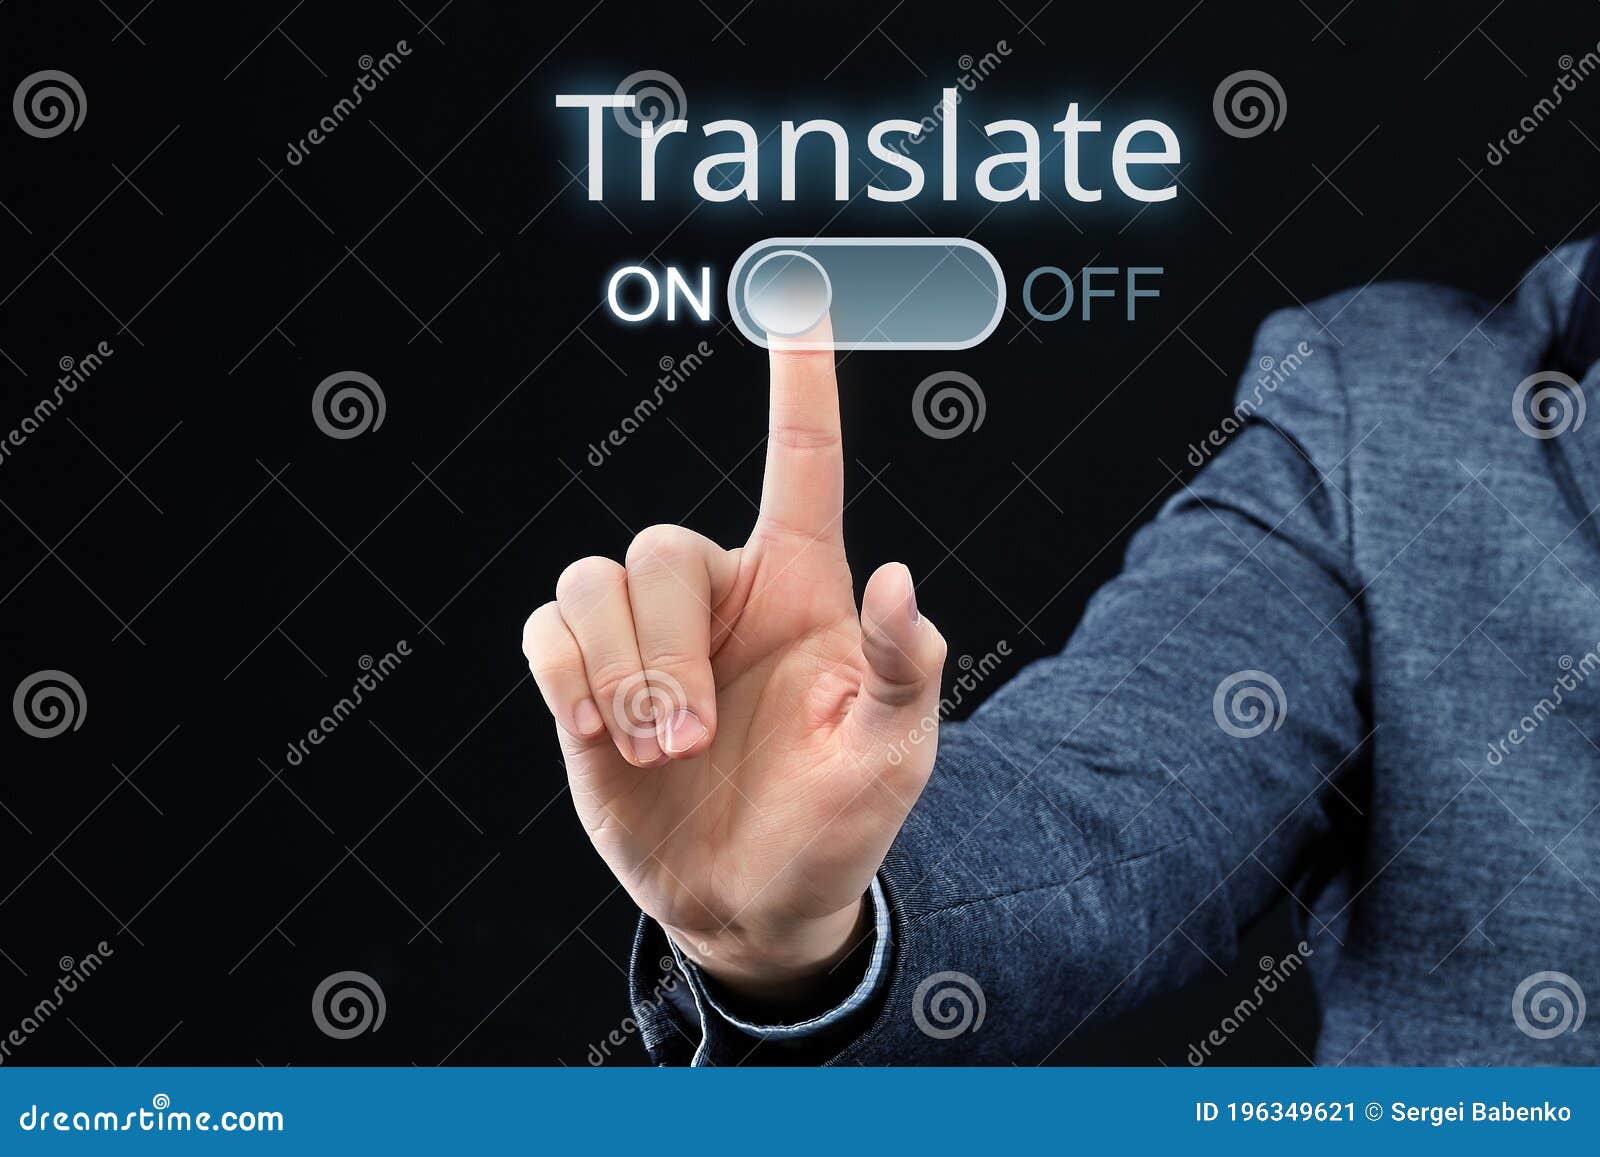 the persona turn on an abstract translation program